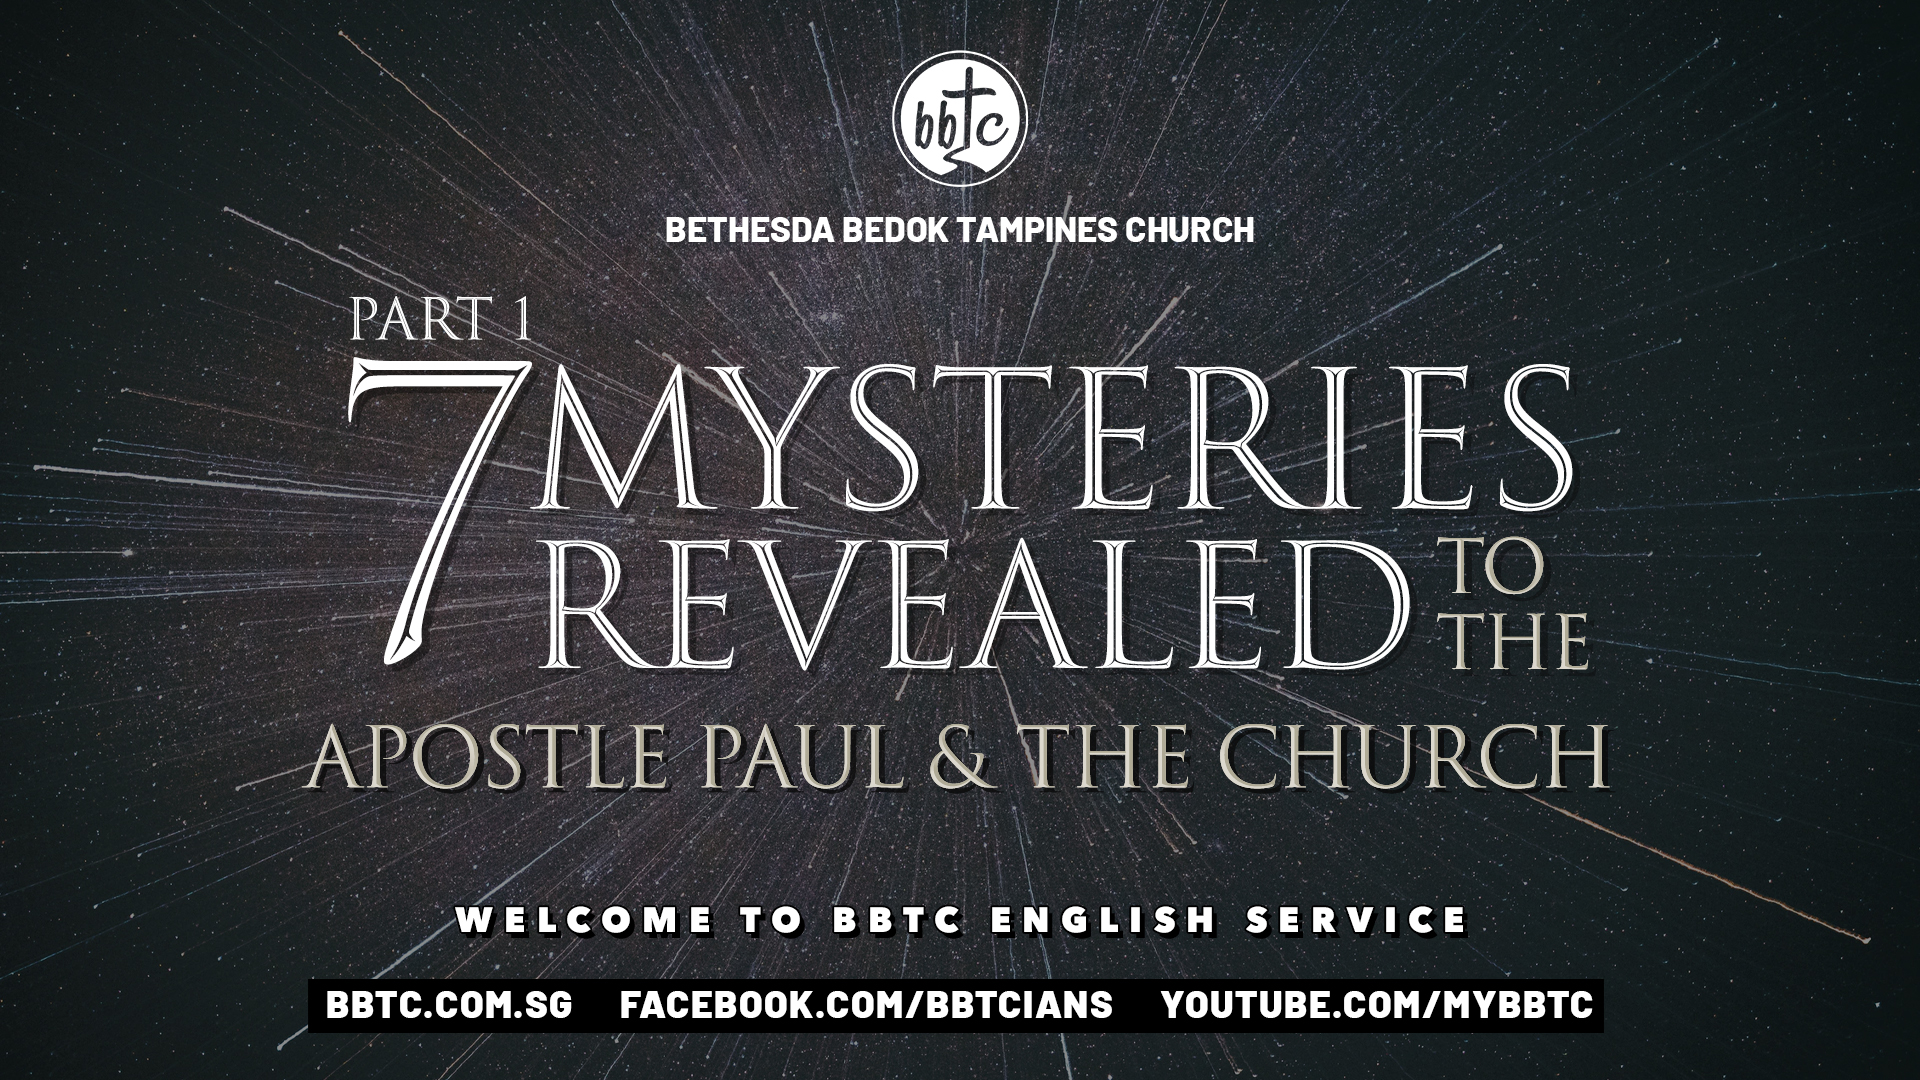 7 MYSTERIES REVEALED TO THE APOSTLE PAUL AND THE CHURCH (PART 1)